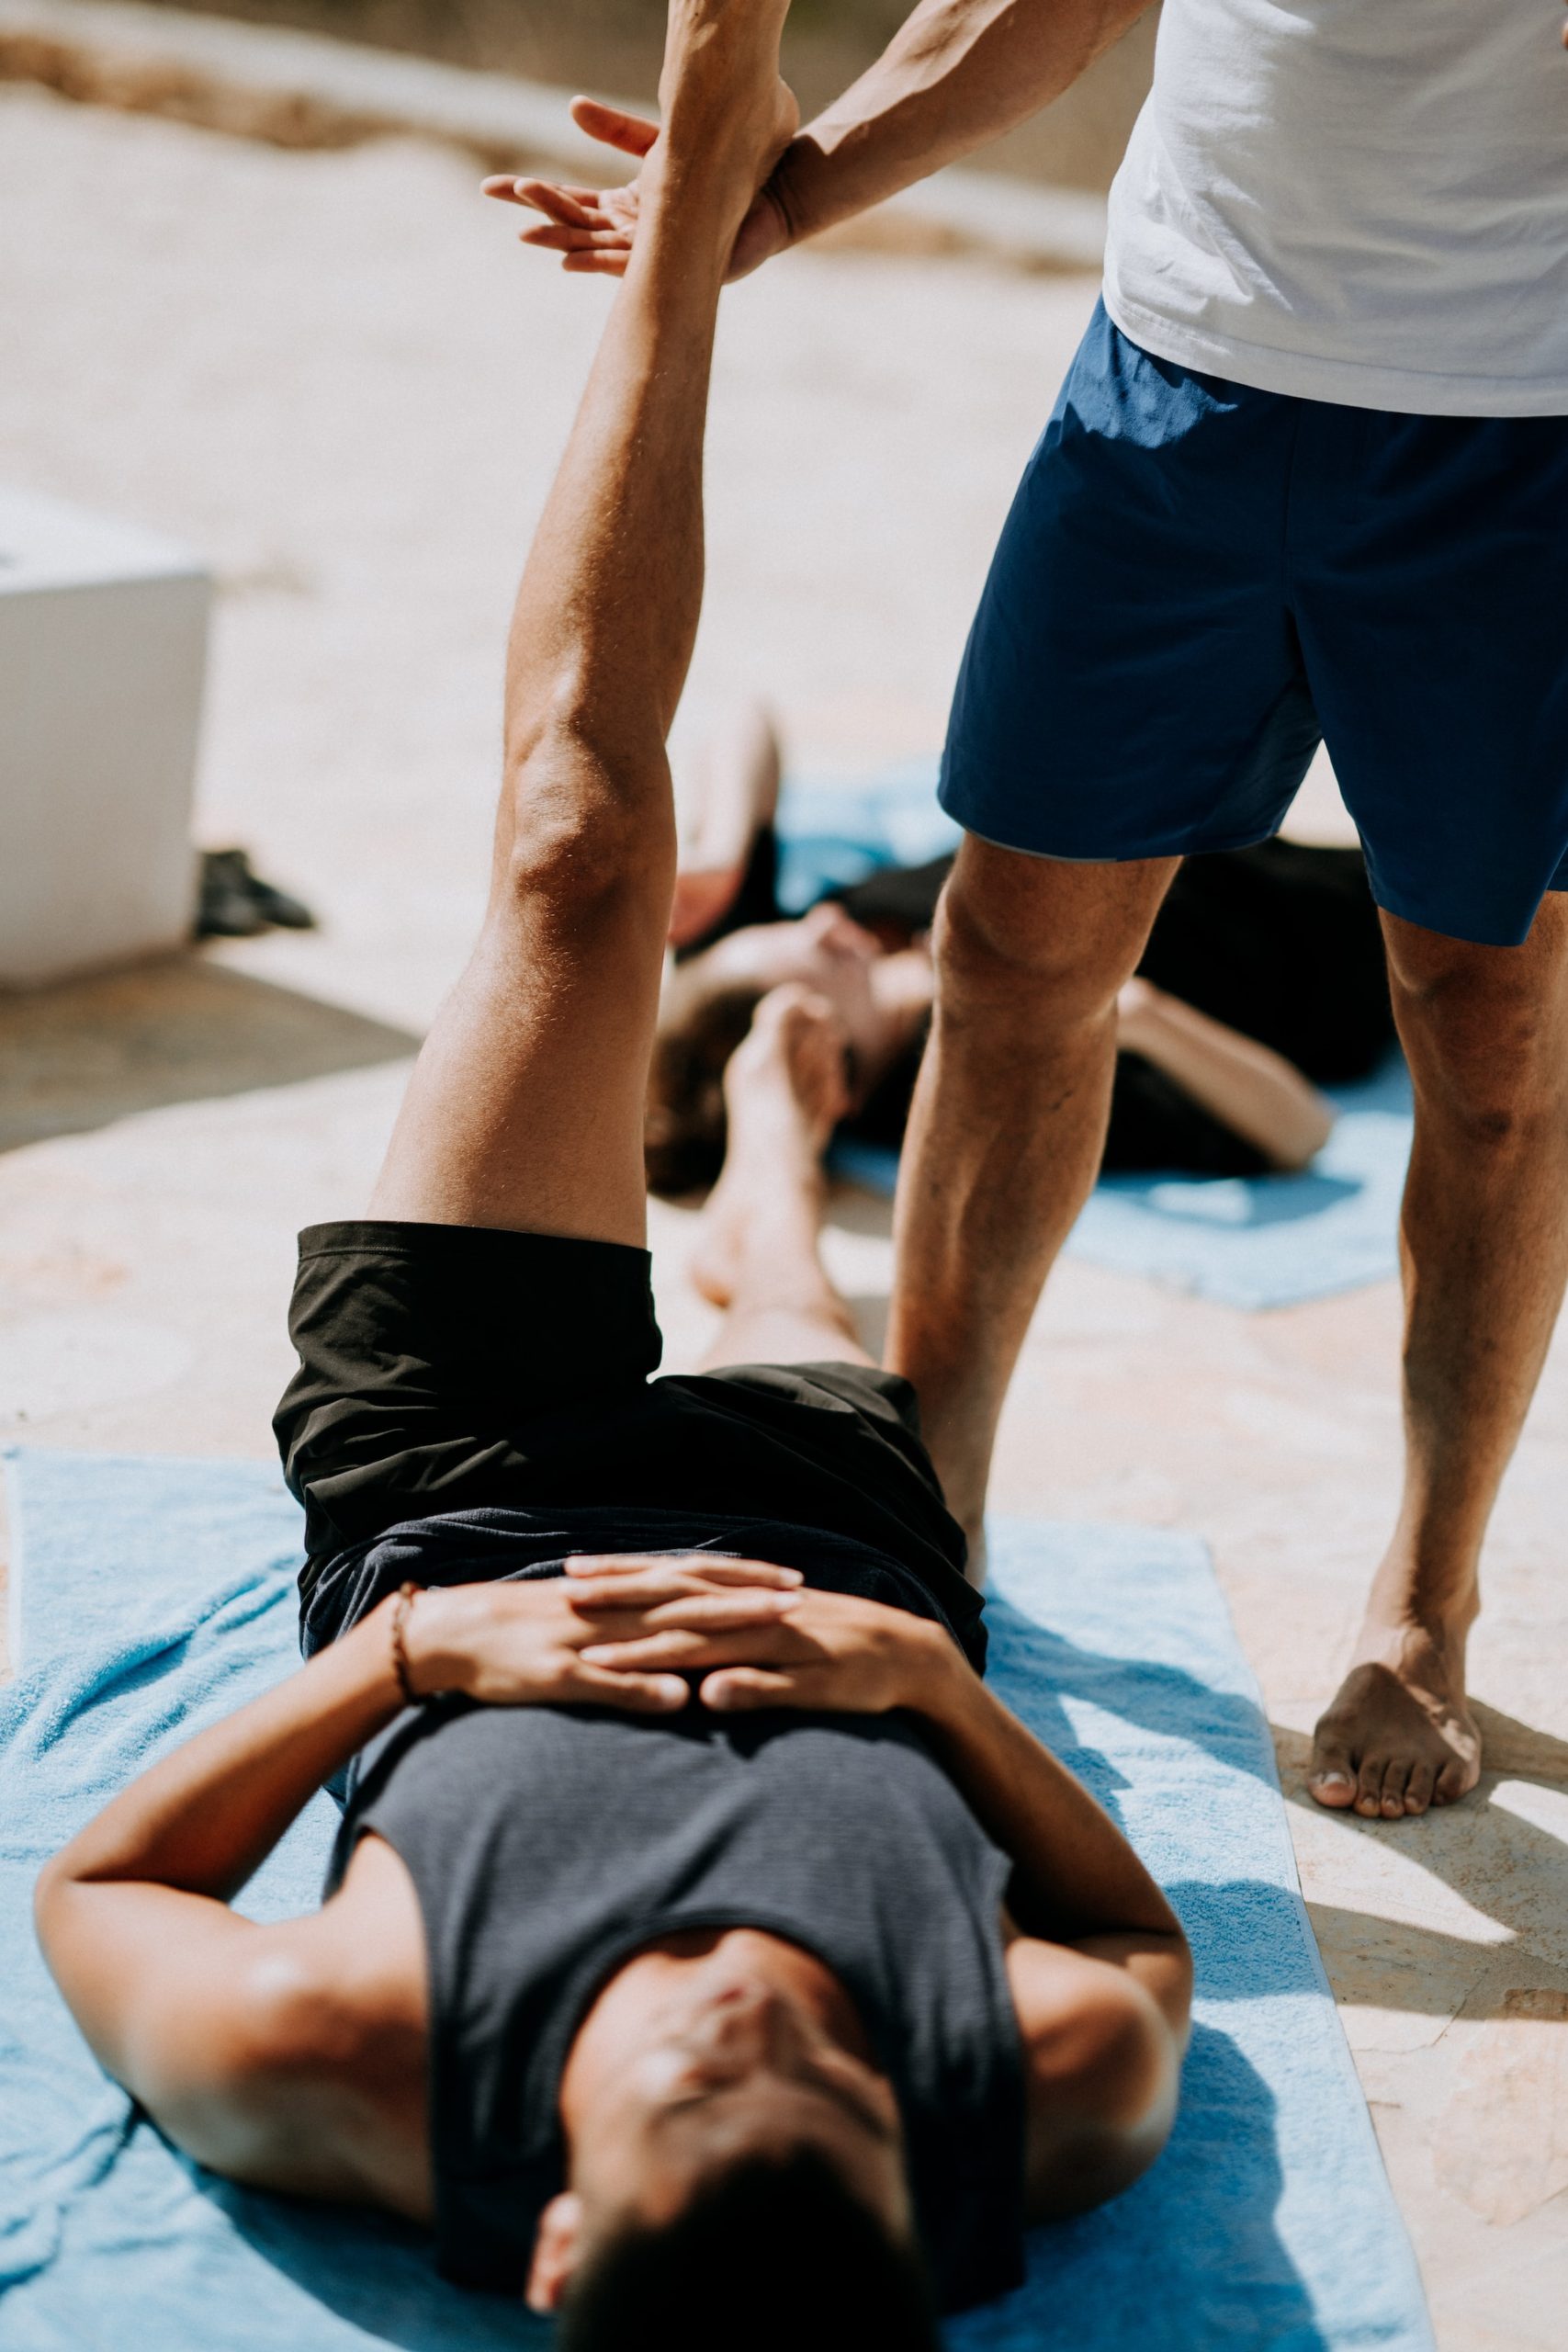 the image shows a trainer helping a man with a stretching